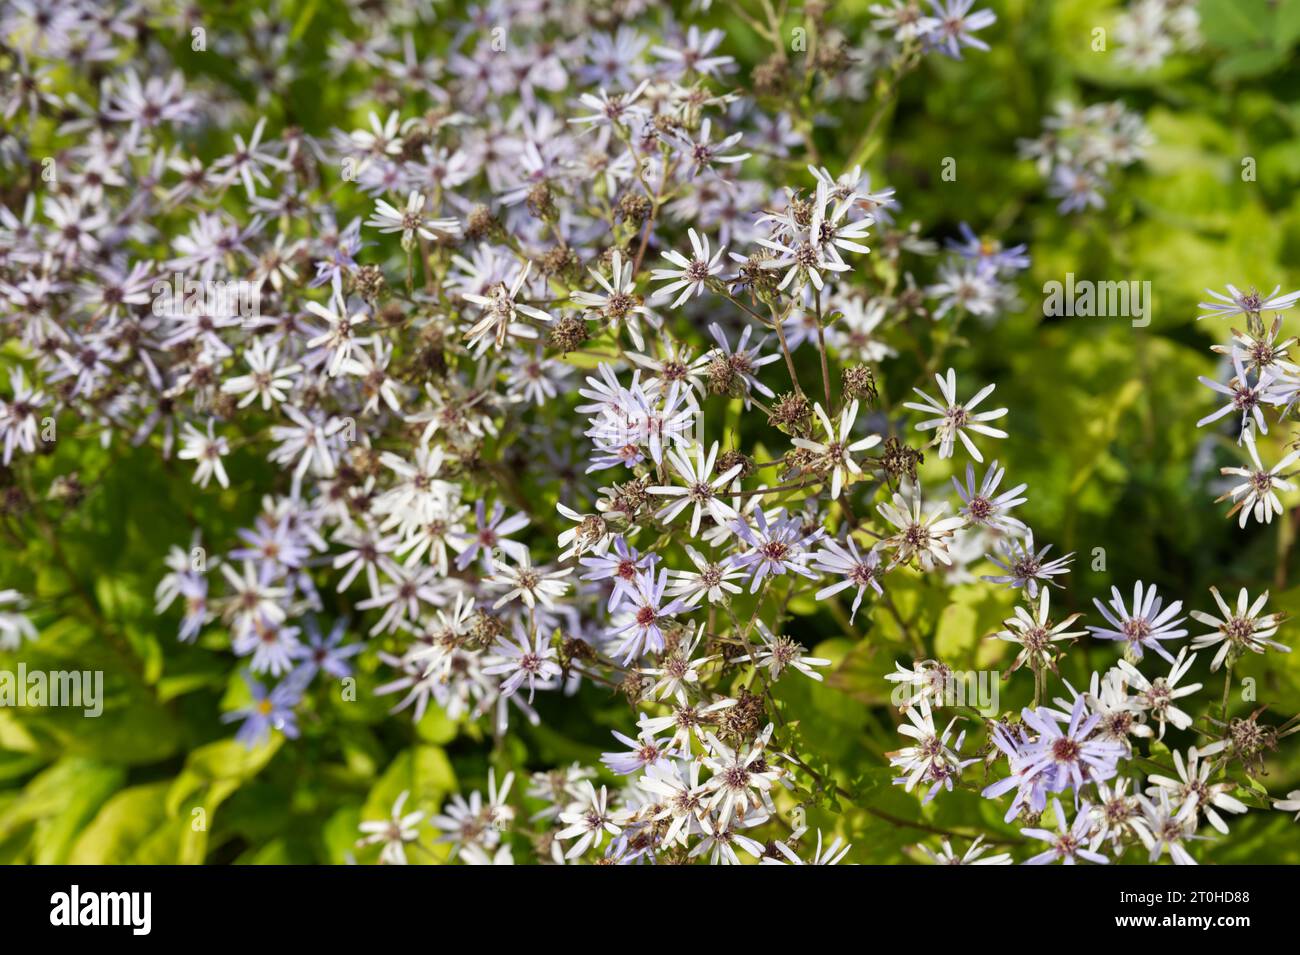 Pale purple autumn flowers of wood aster Eurybia x herveyi, also known as Aster macrophyllus Twilight or Michaelmas daisy in UK garden September Stock Photo